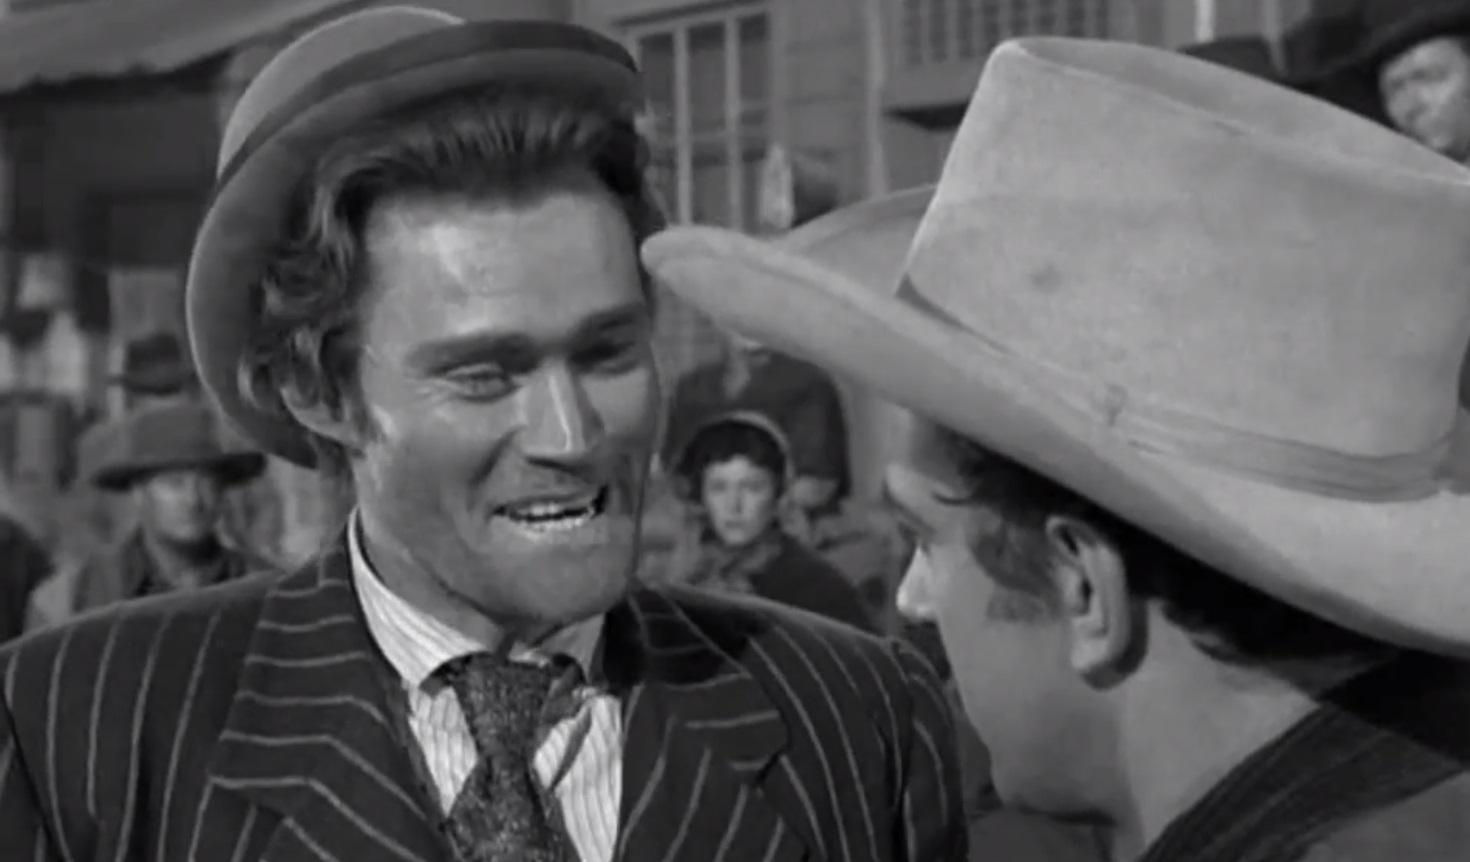 Chuck Connors "towering" over James Arness